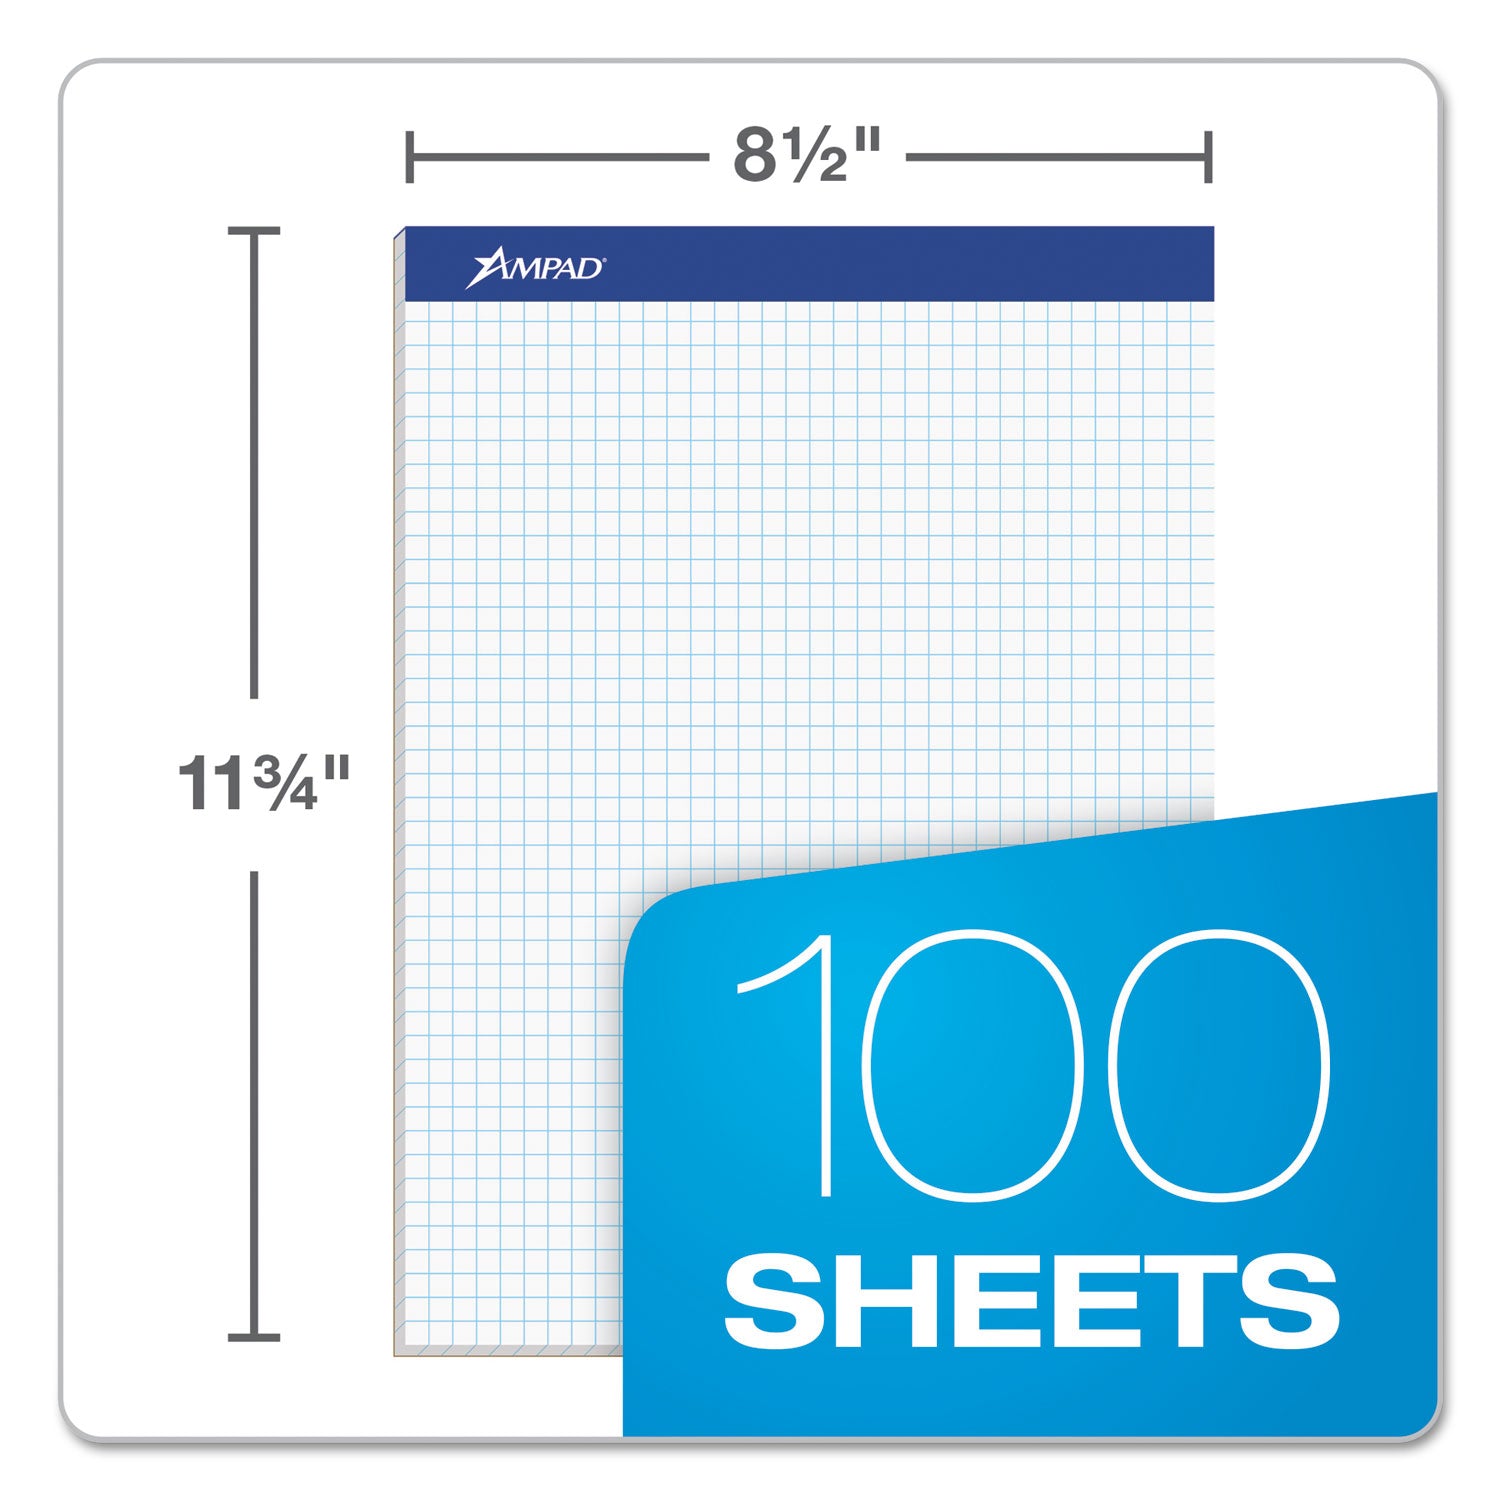 Quad Double Sheet Pad, Quadrille Rule (4 sq/in), 100 White 8.5 x 11.75 Sheets - 